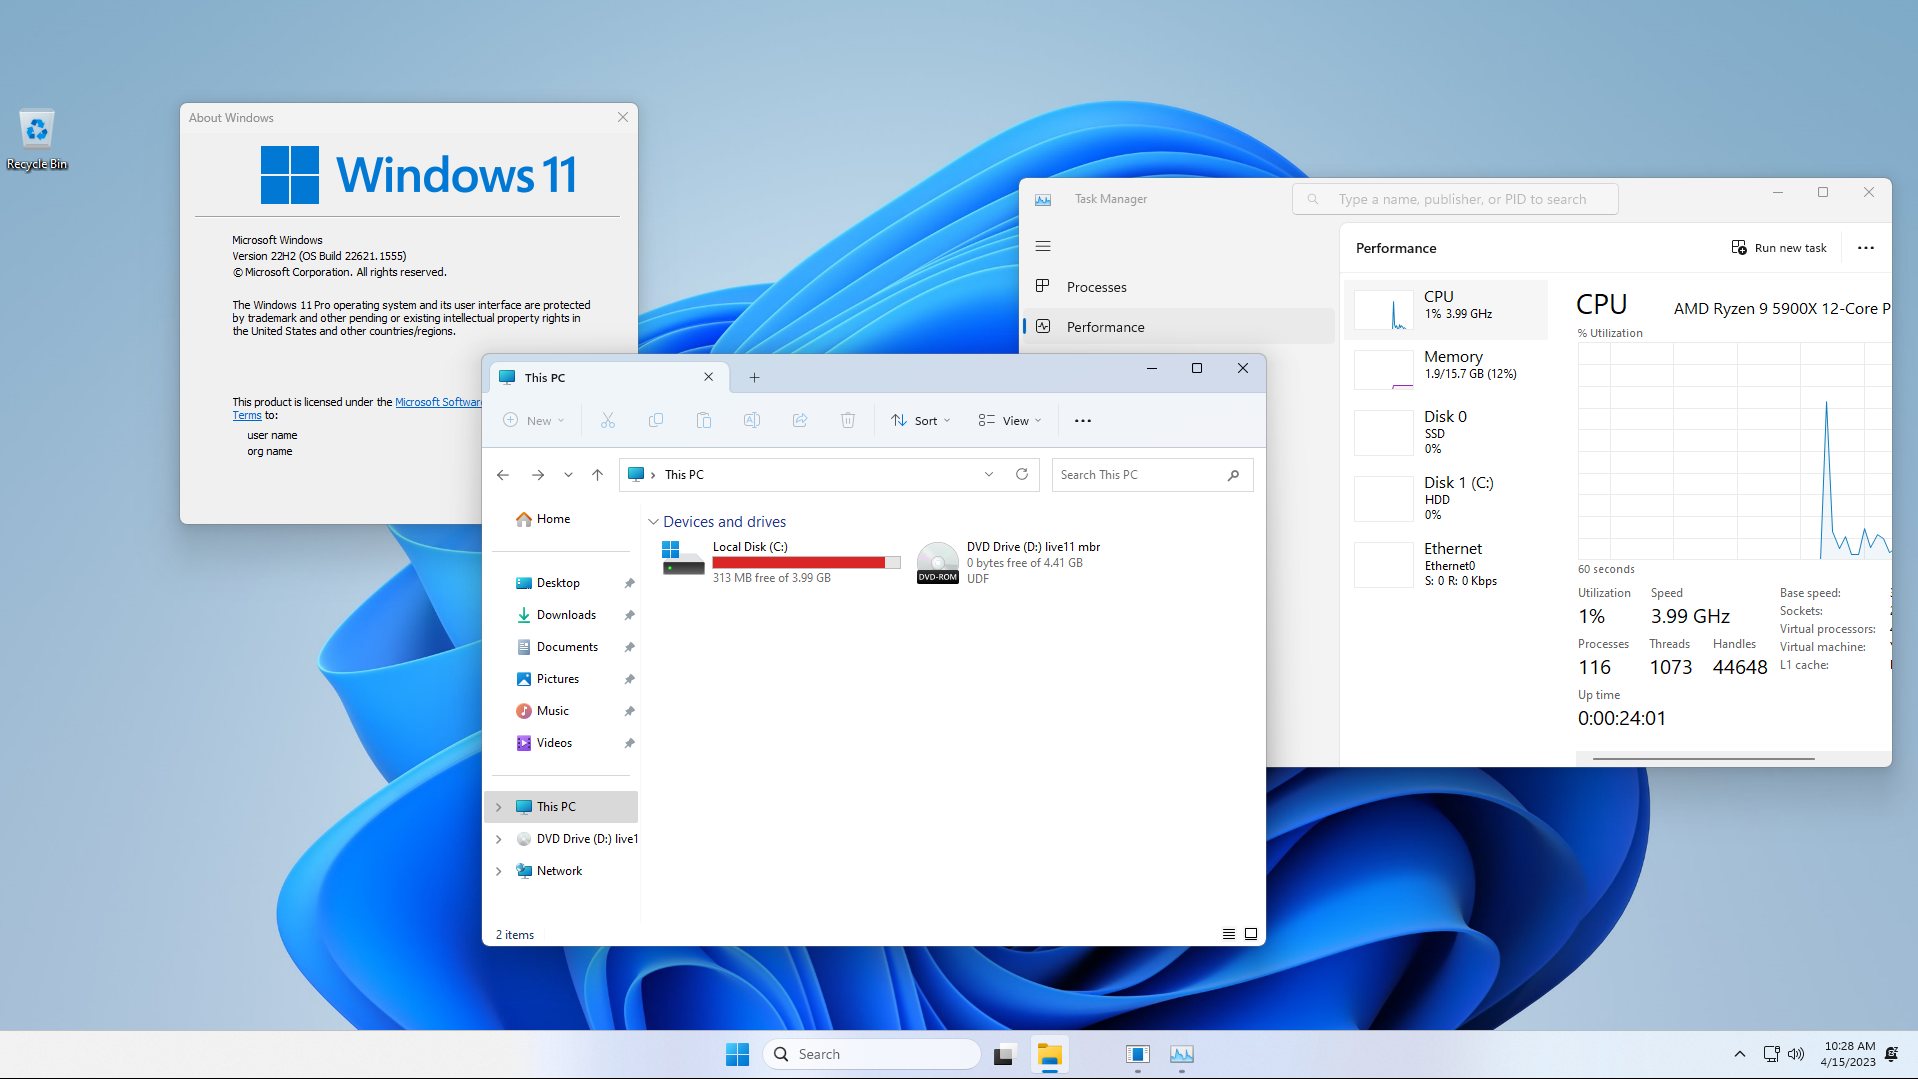 Download Tiny11 1.0 for Windows 